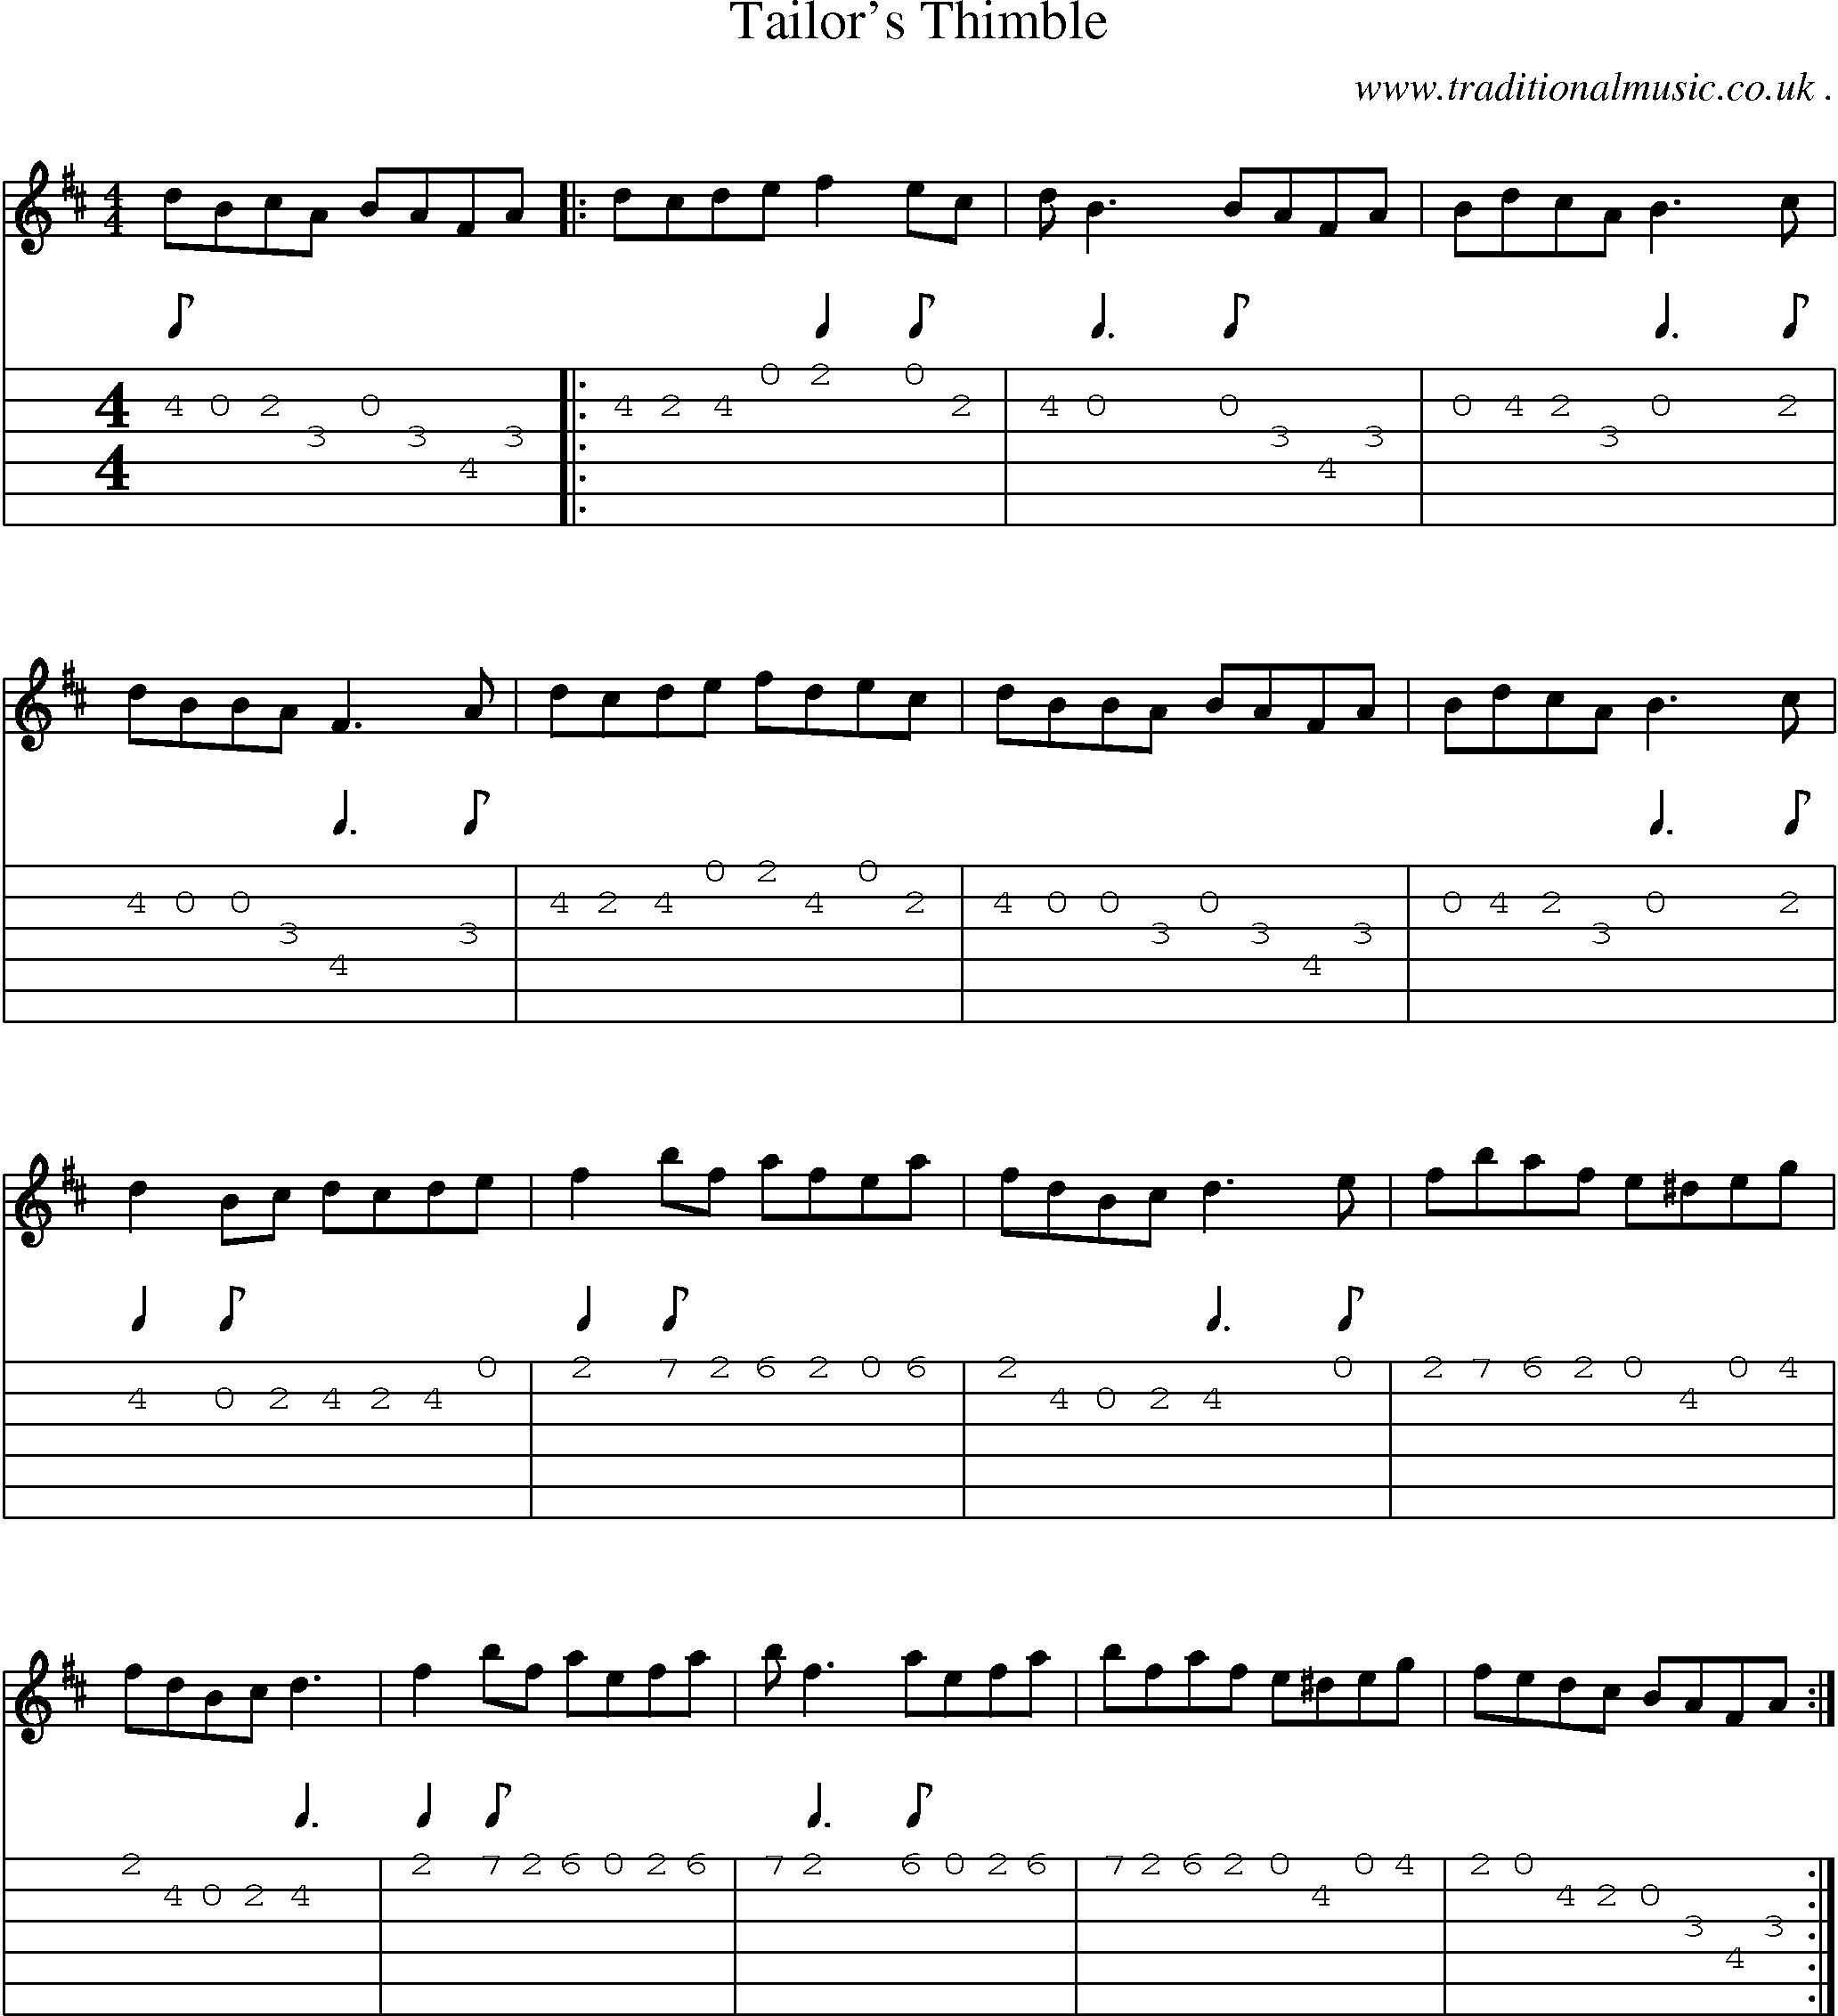 Sheet-Music and Guitar Tabs for Tailors Thimble